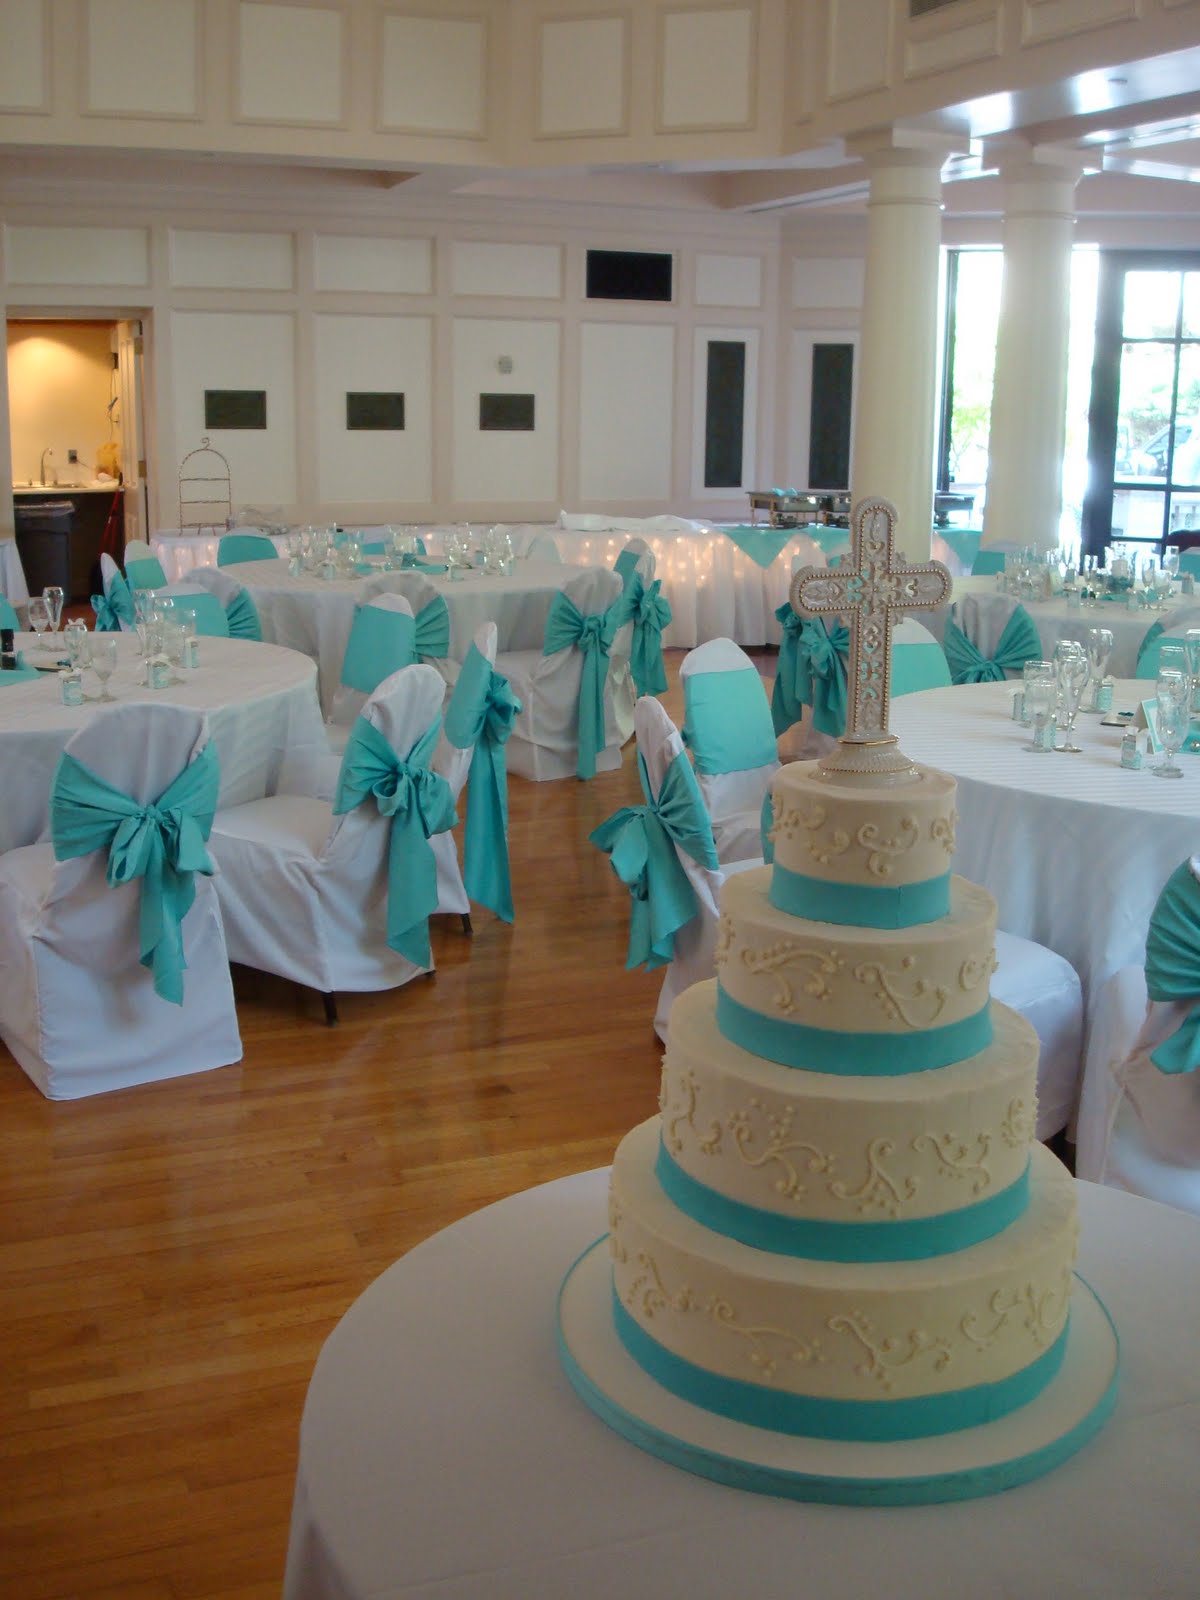 Teal Wedding Inspiration Themes - Designer Chair Covers To Go